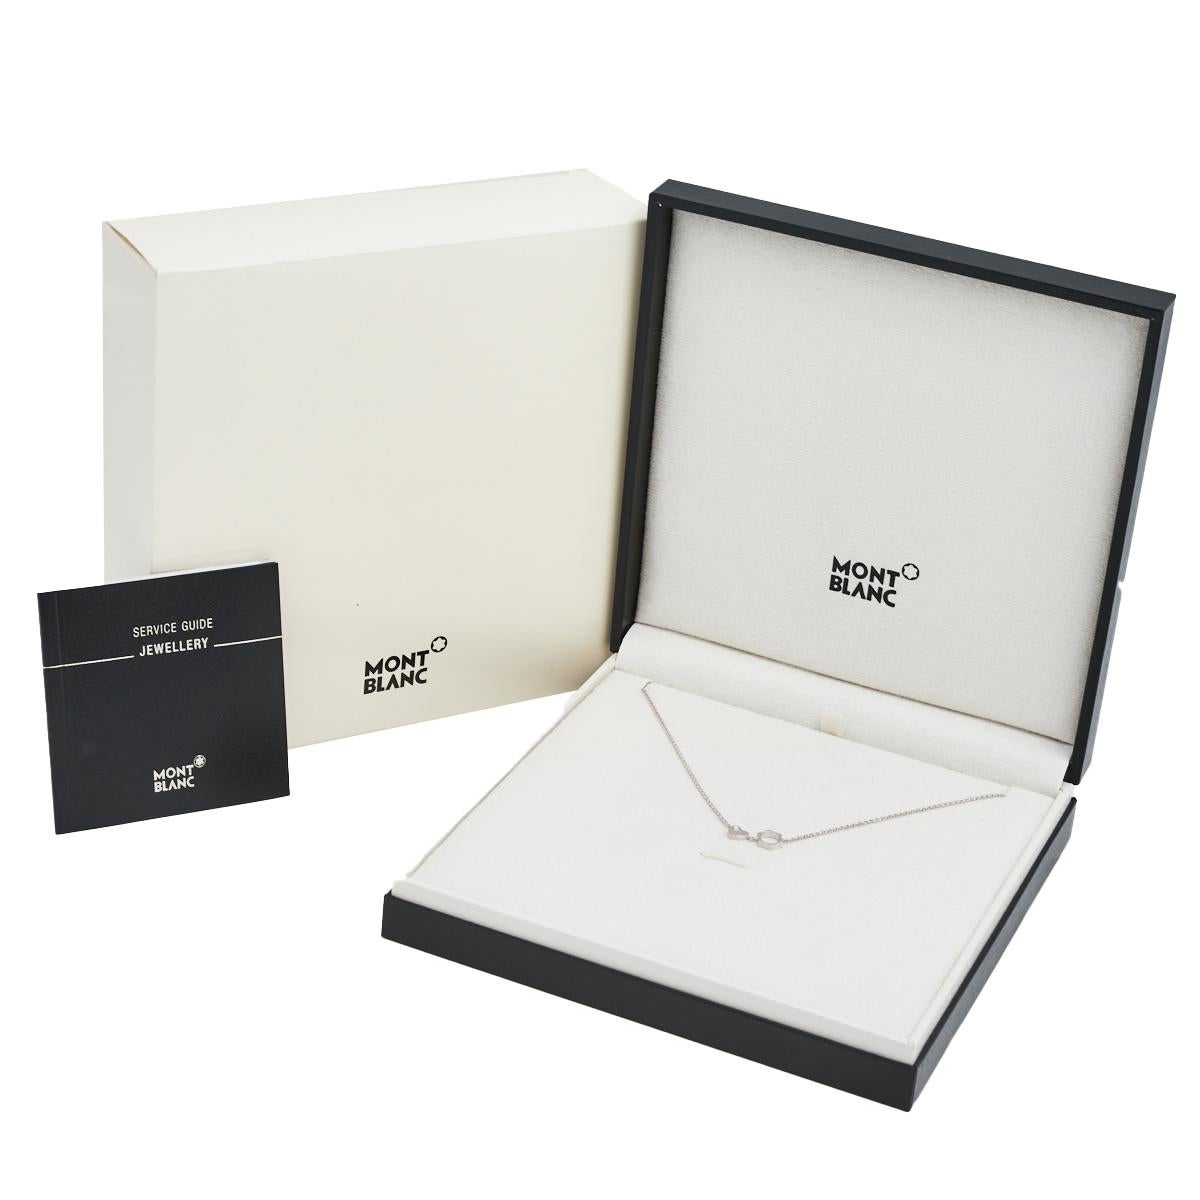 This lovely Montblanc necklace is one accessory you will definitely love owning. Crafted from 18k white gold metal, this piece flaunts a diamond-embellished heart and the brand's star logo attached side by side to gracefully highlight your